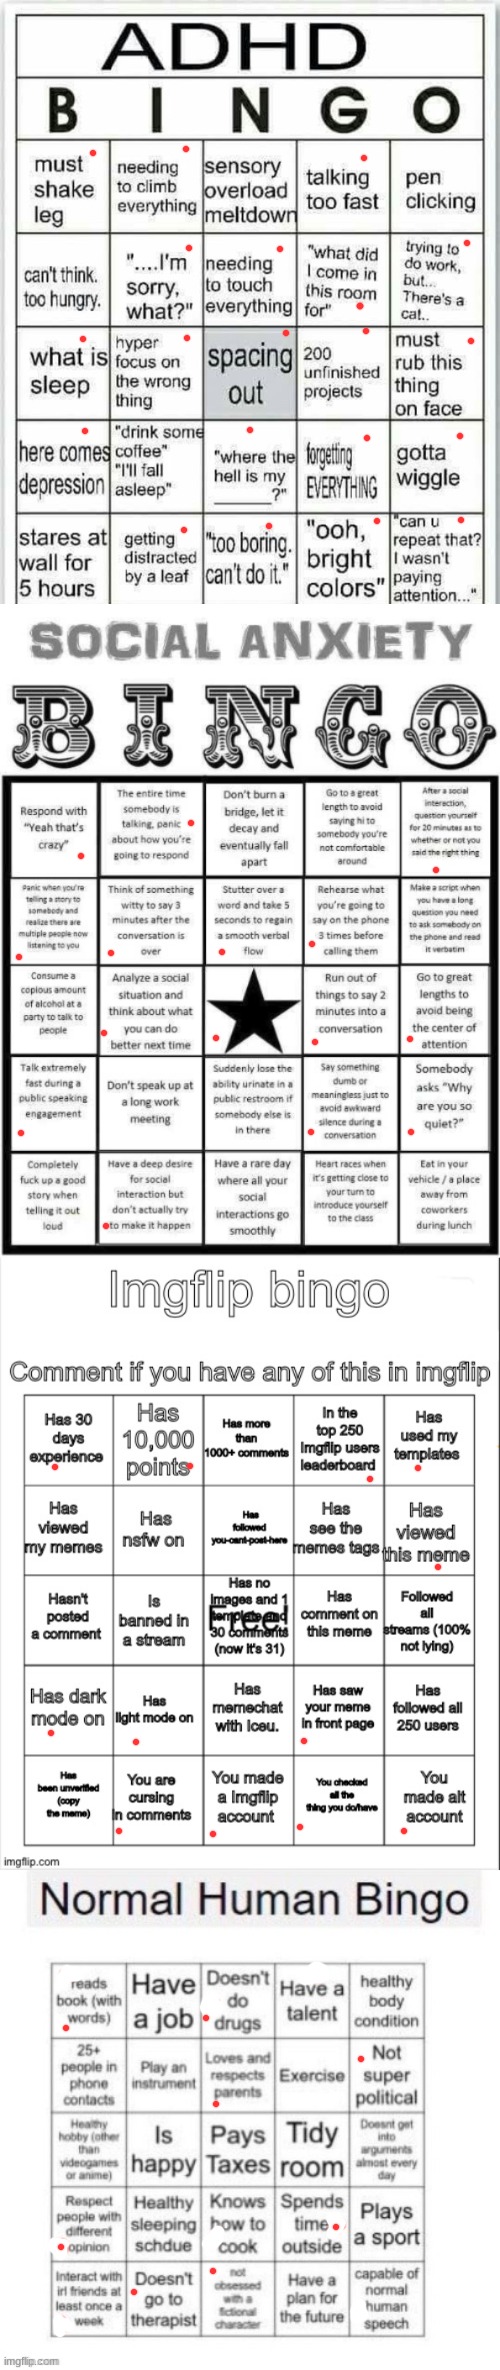 no, i do not have a talent. i suck at absolutely everything there is too exist. | image tagged in adhd bingo,i suck and i pissed my pants | made w/ Imgflip meme maker